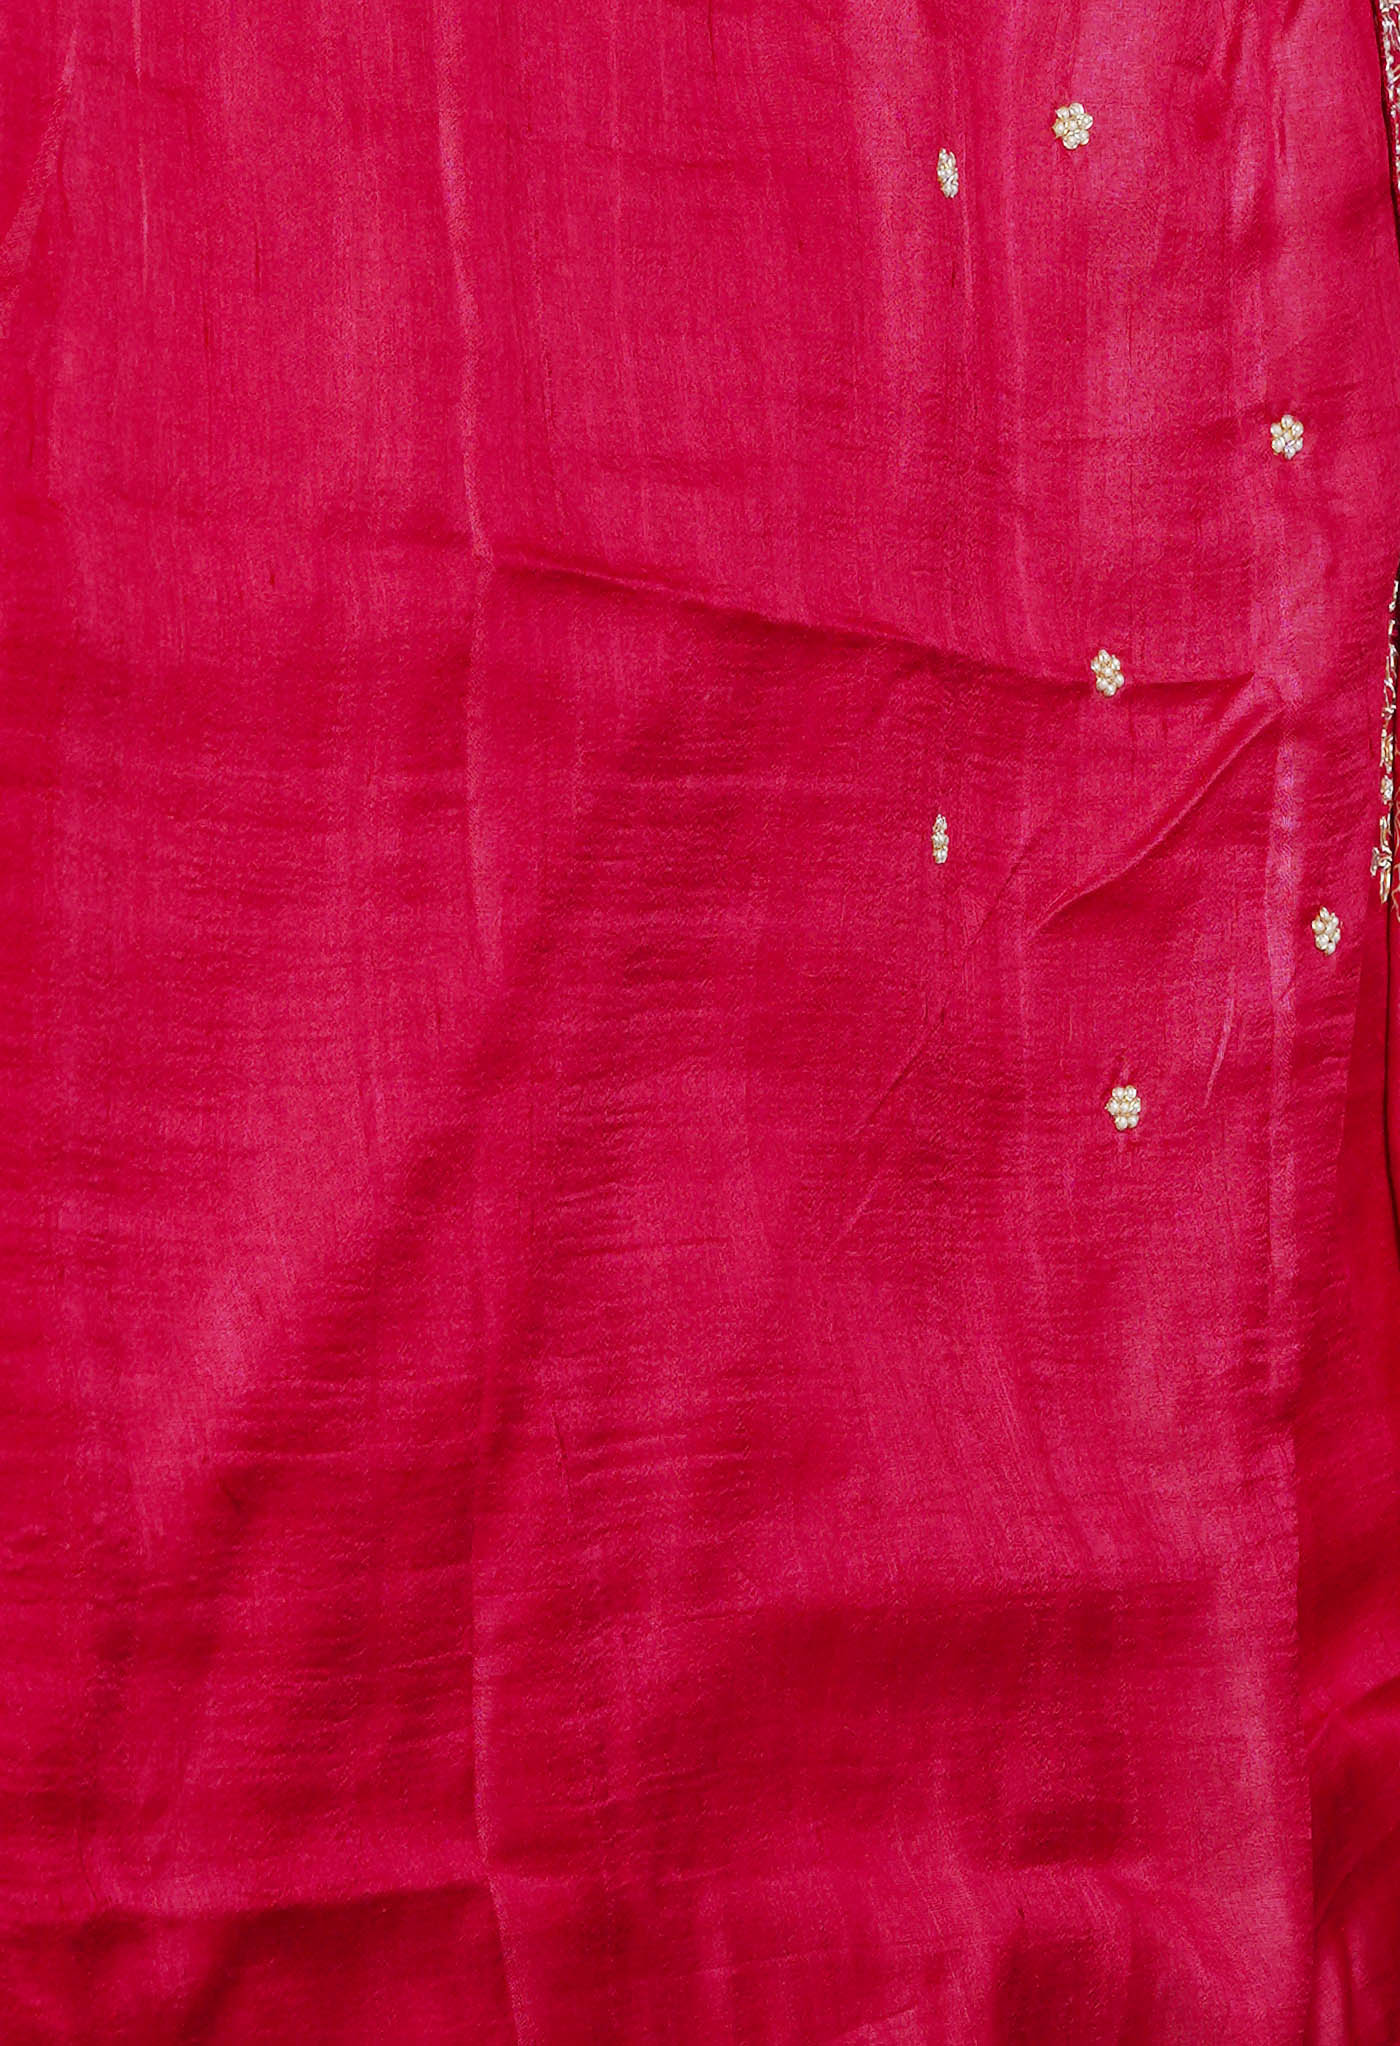 Cerise Pink Pure Handloom Block Printed With Gotta  and French knot Stitch Embroidery Bengal Tussar Silk Saree-UNM72169